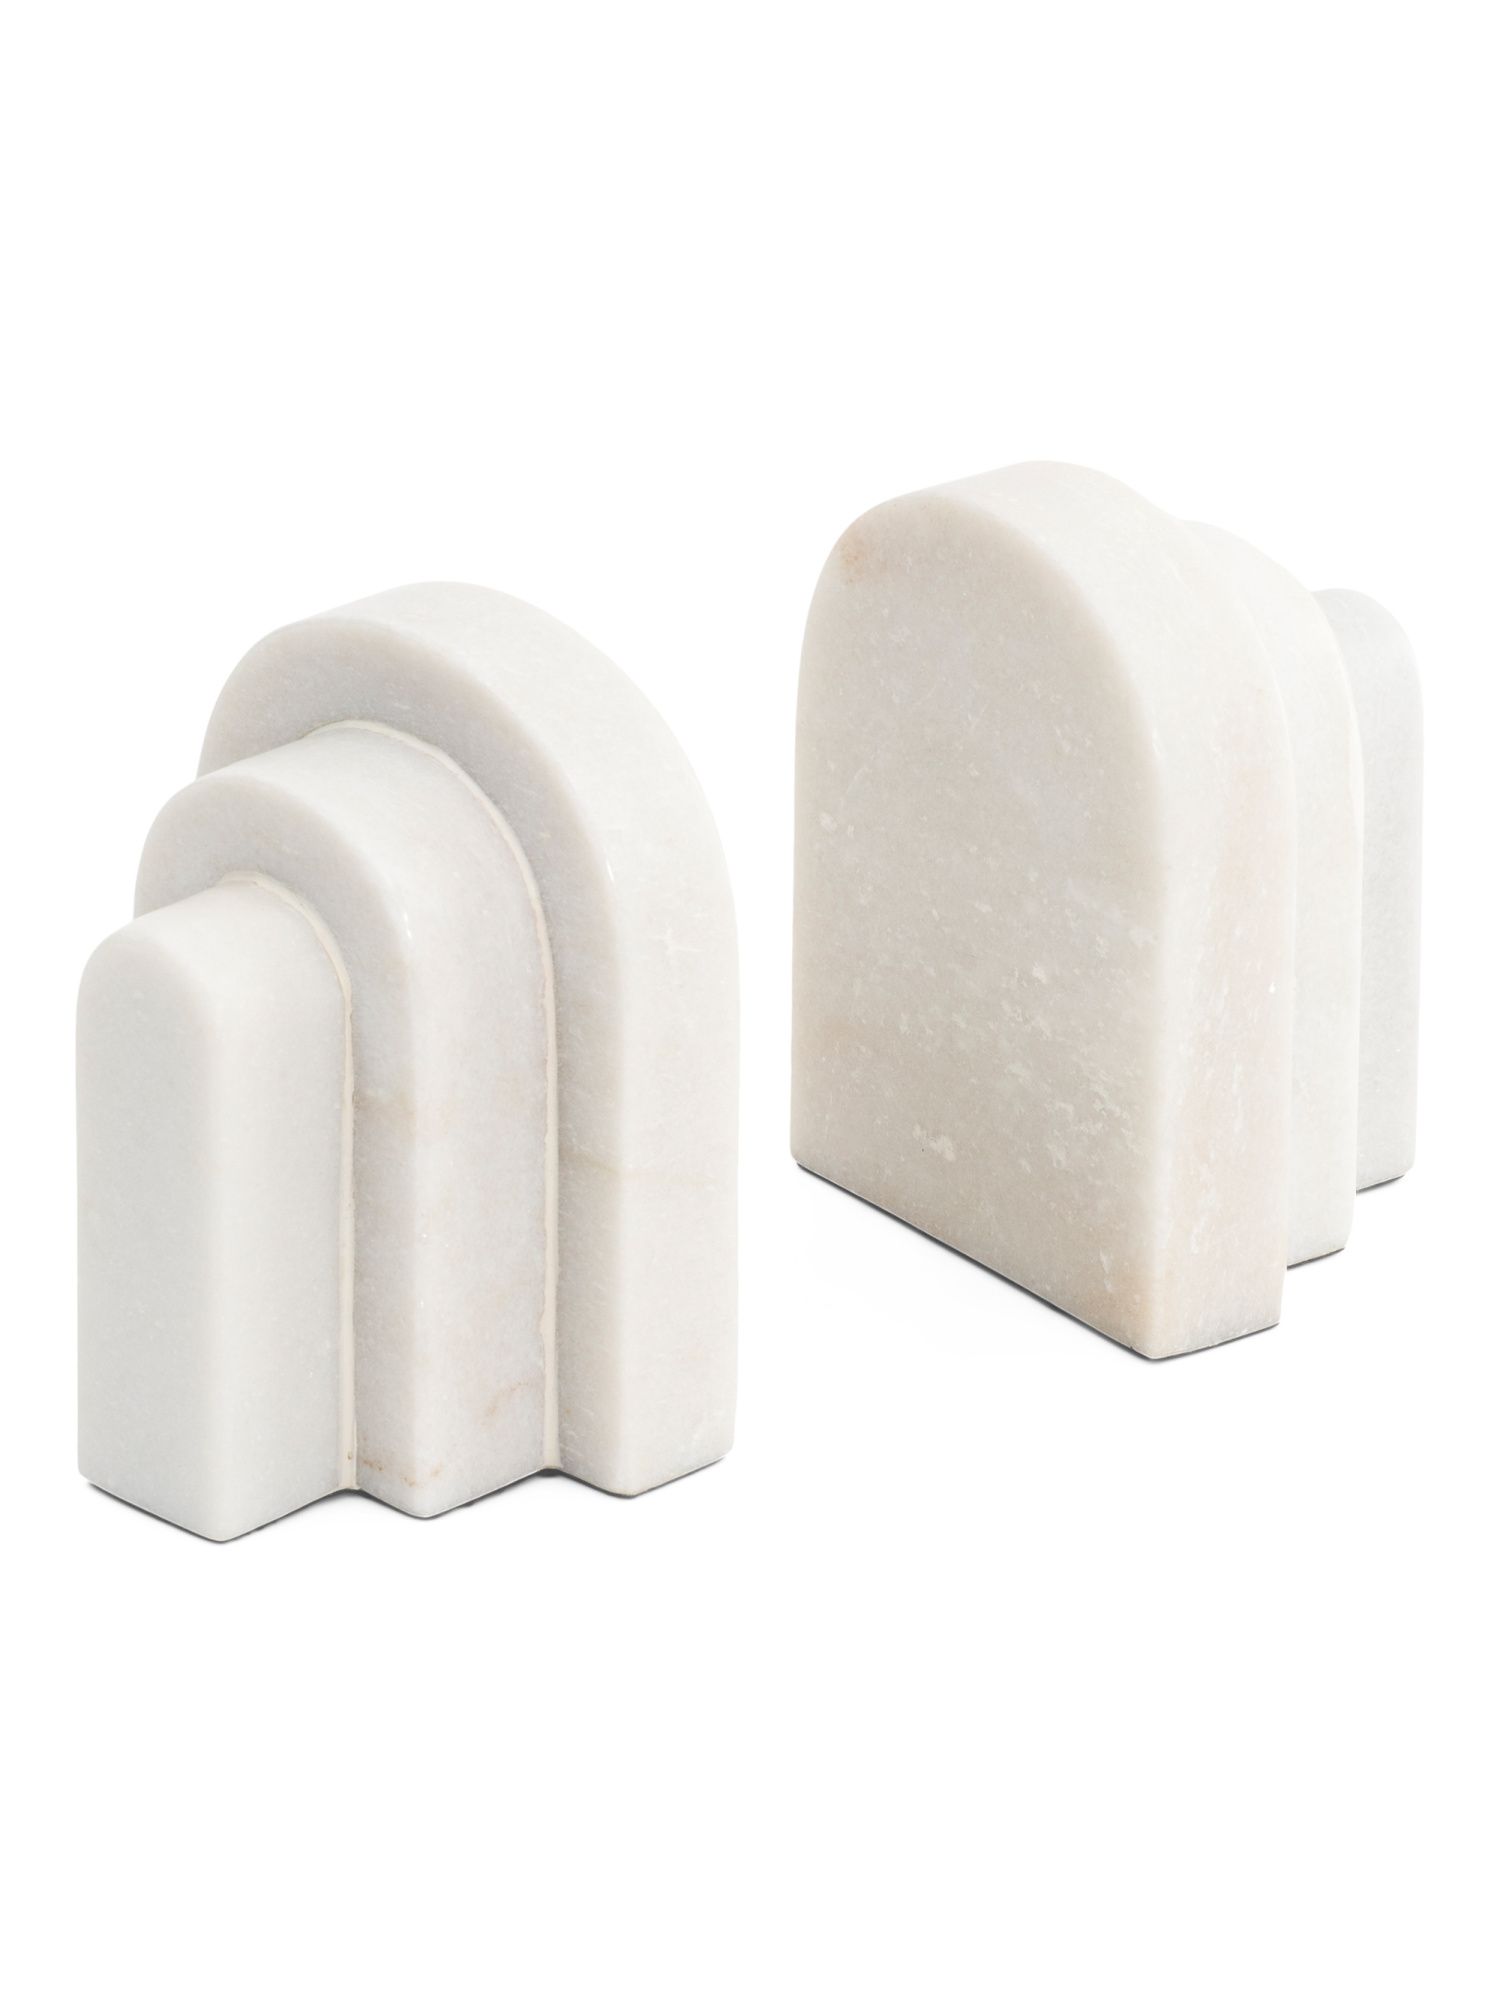 2pc Marble Arched Bookends | TJ Maxx